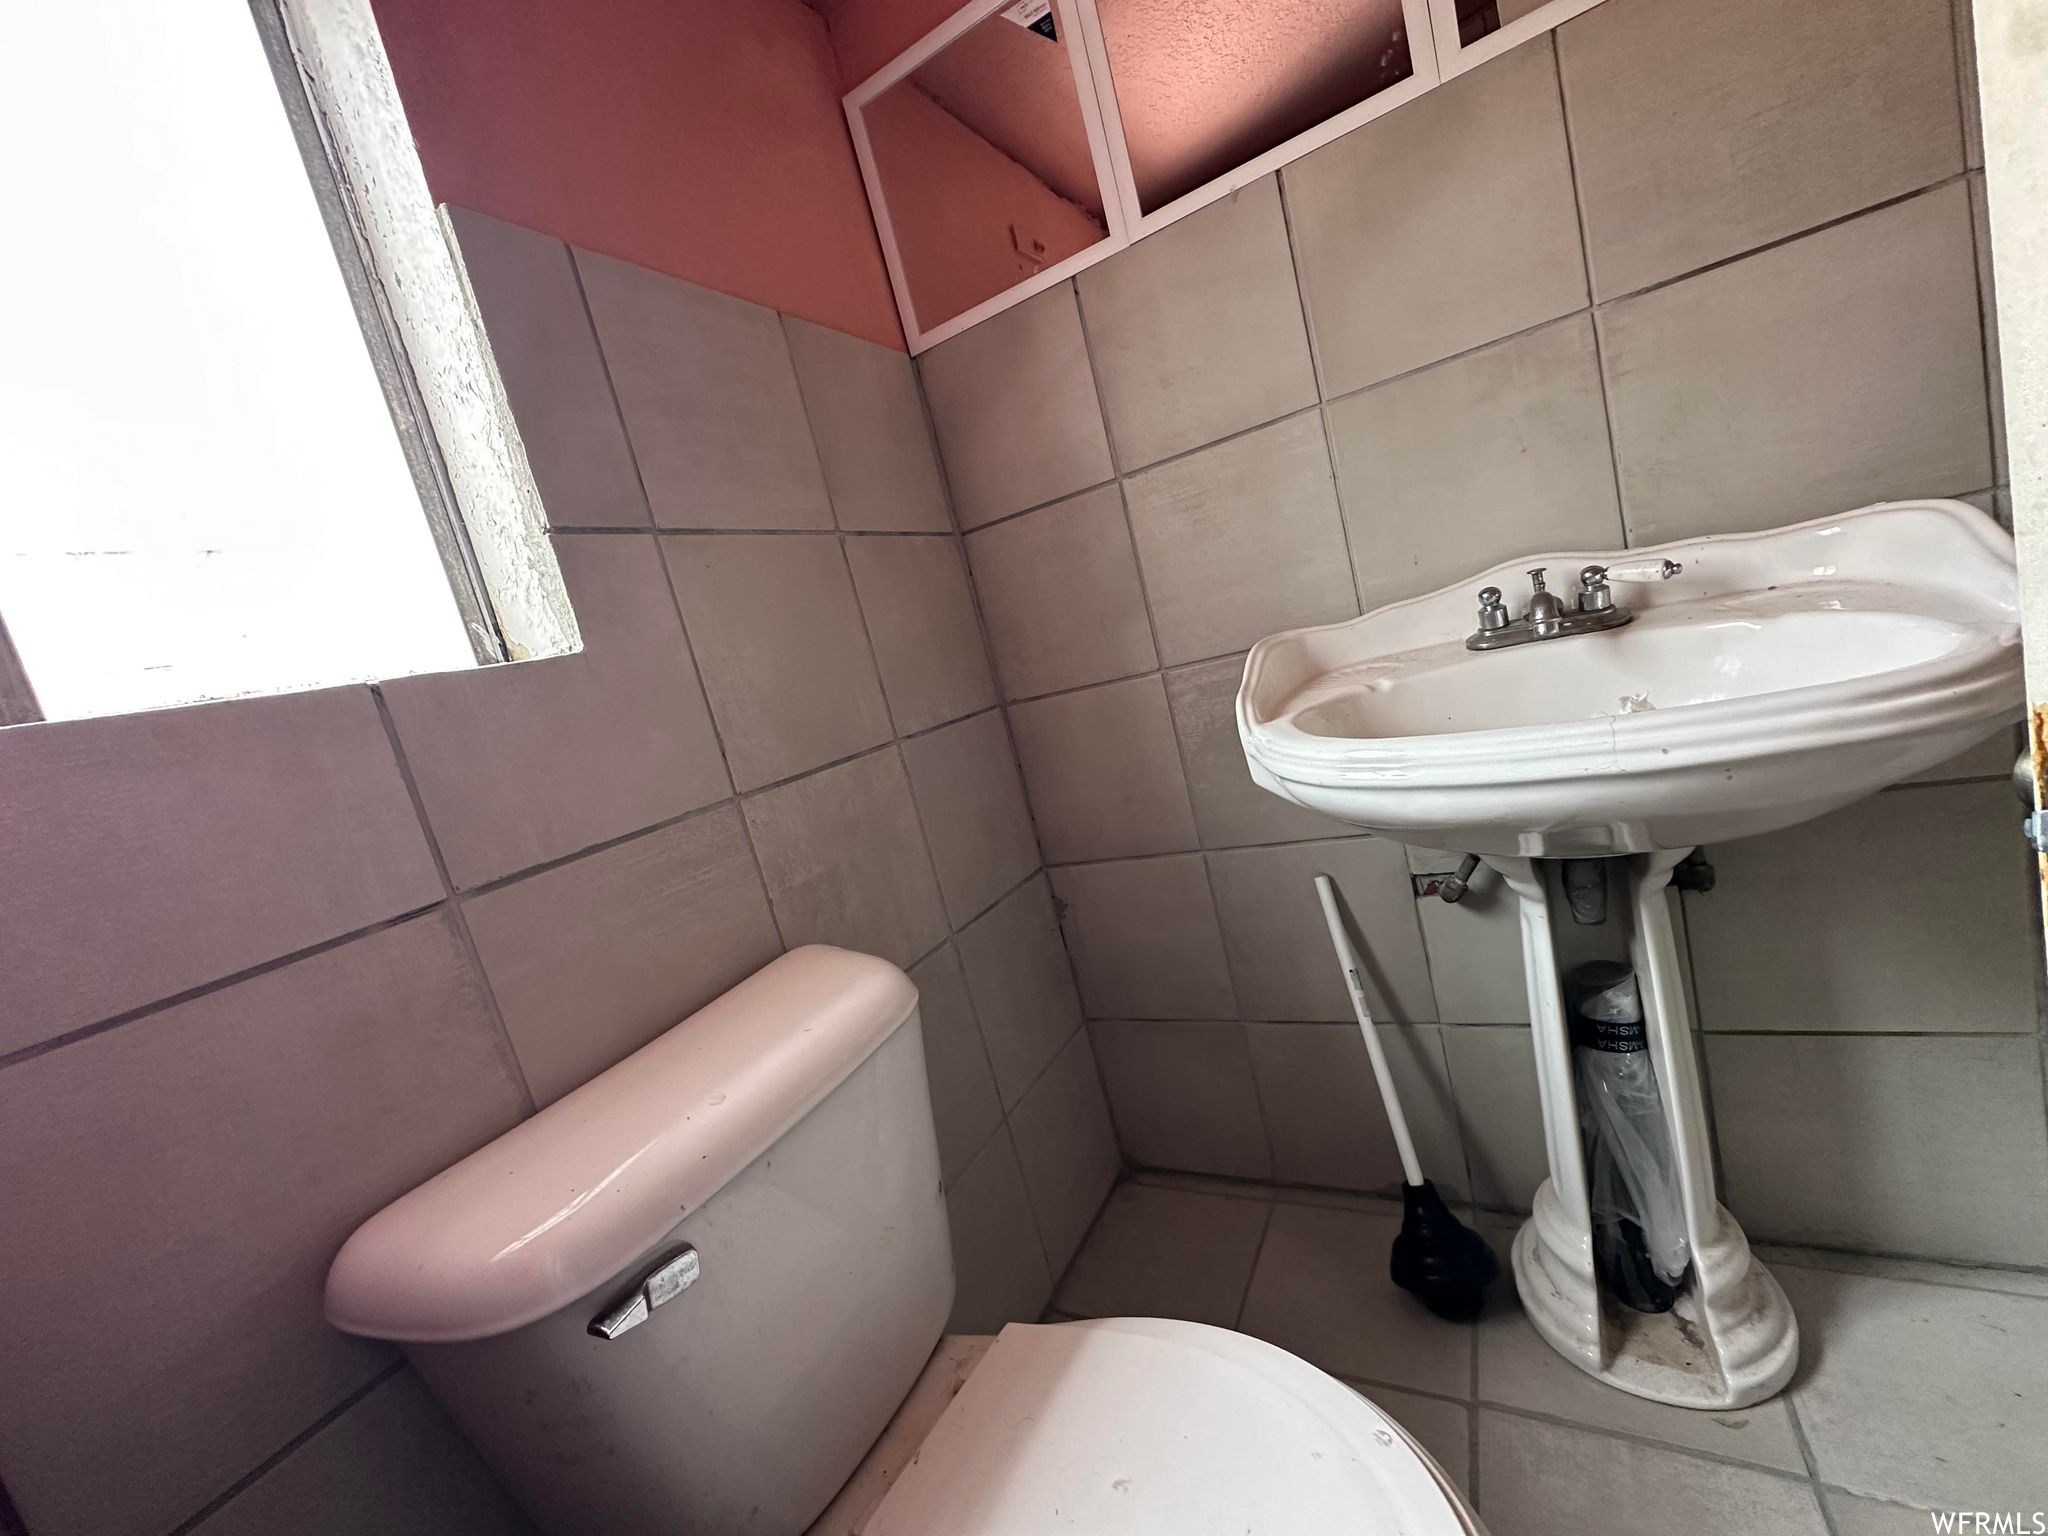 Bathroom with tile flooring, toilet, tile walls, and sink